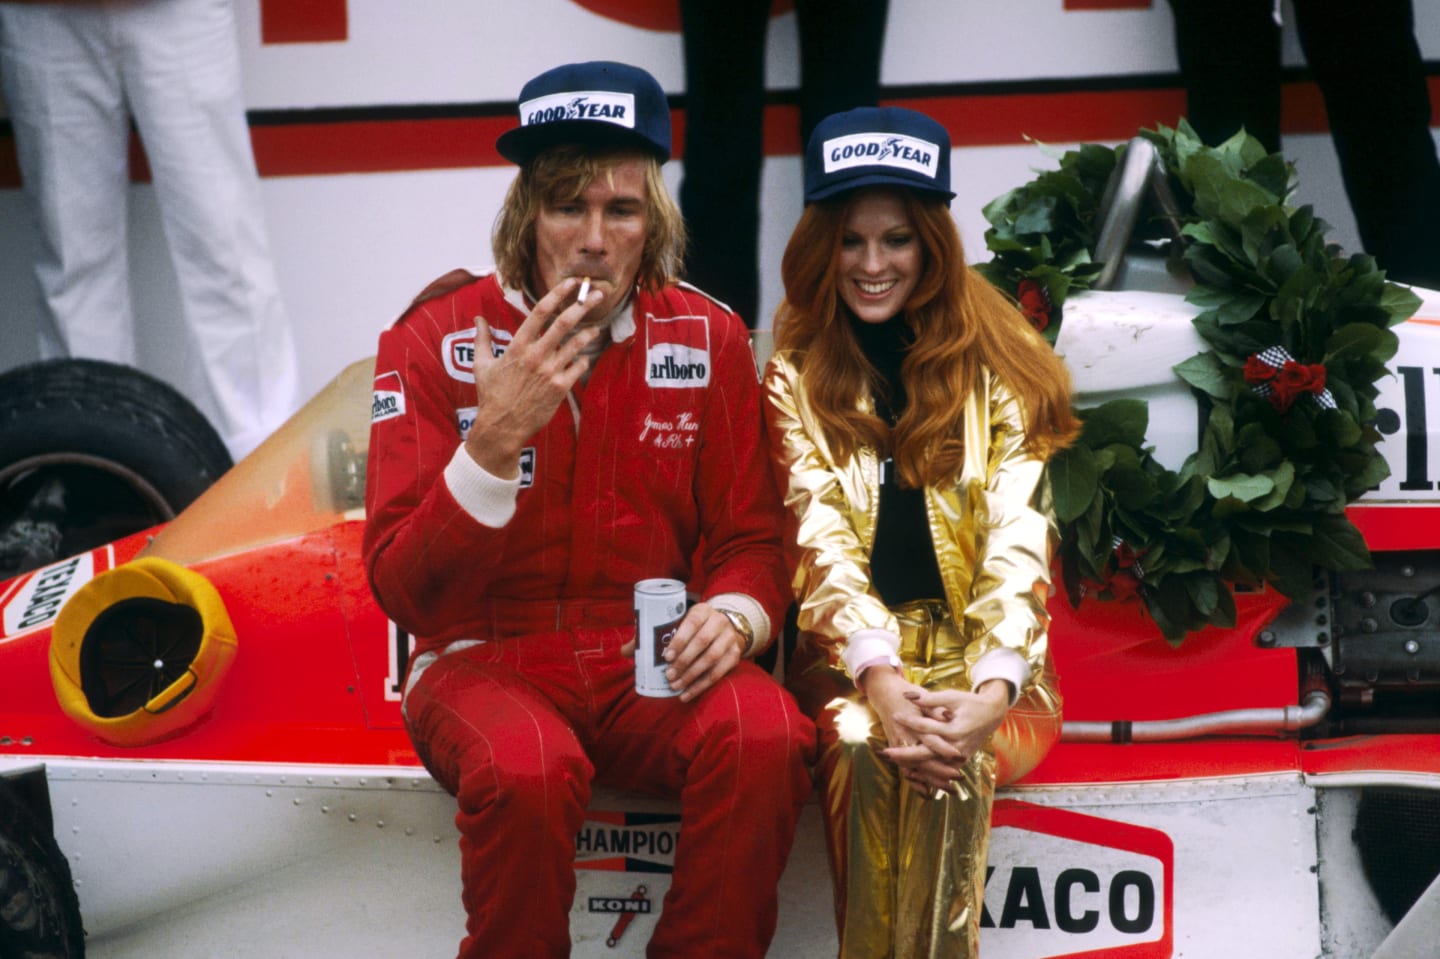 James Hunt (GBR) celebrates his win in Victory Lane with his McLaren M26, a cigarette, a beer, and